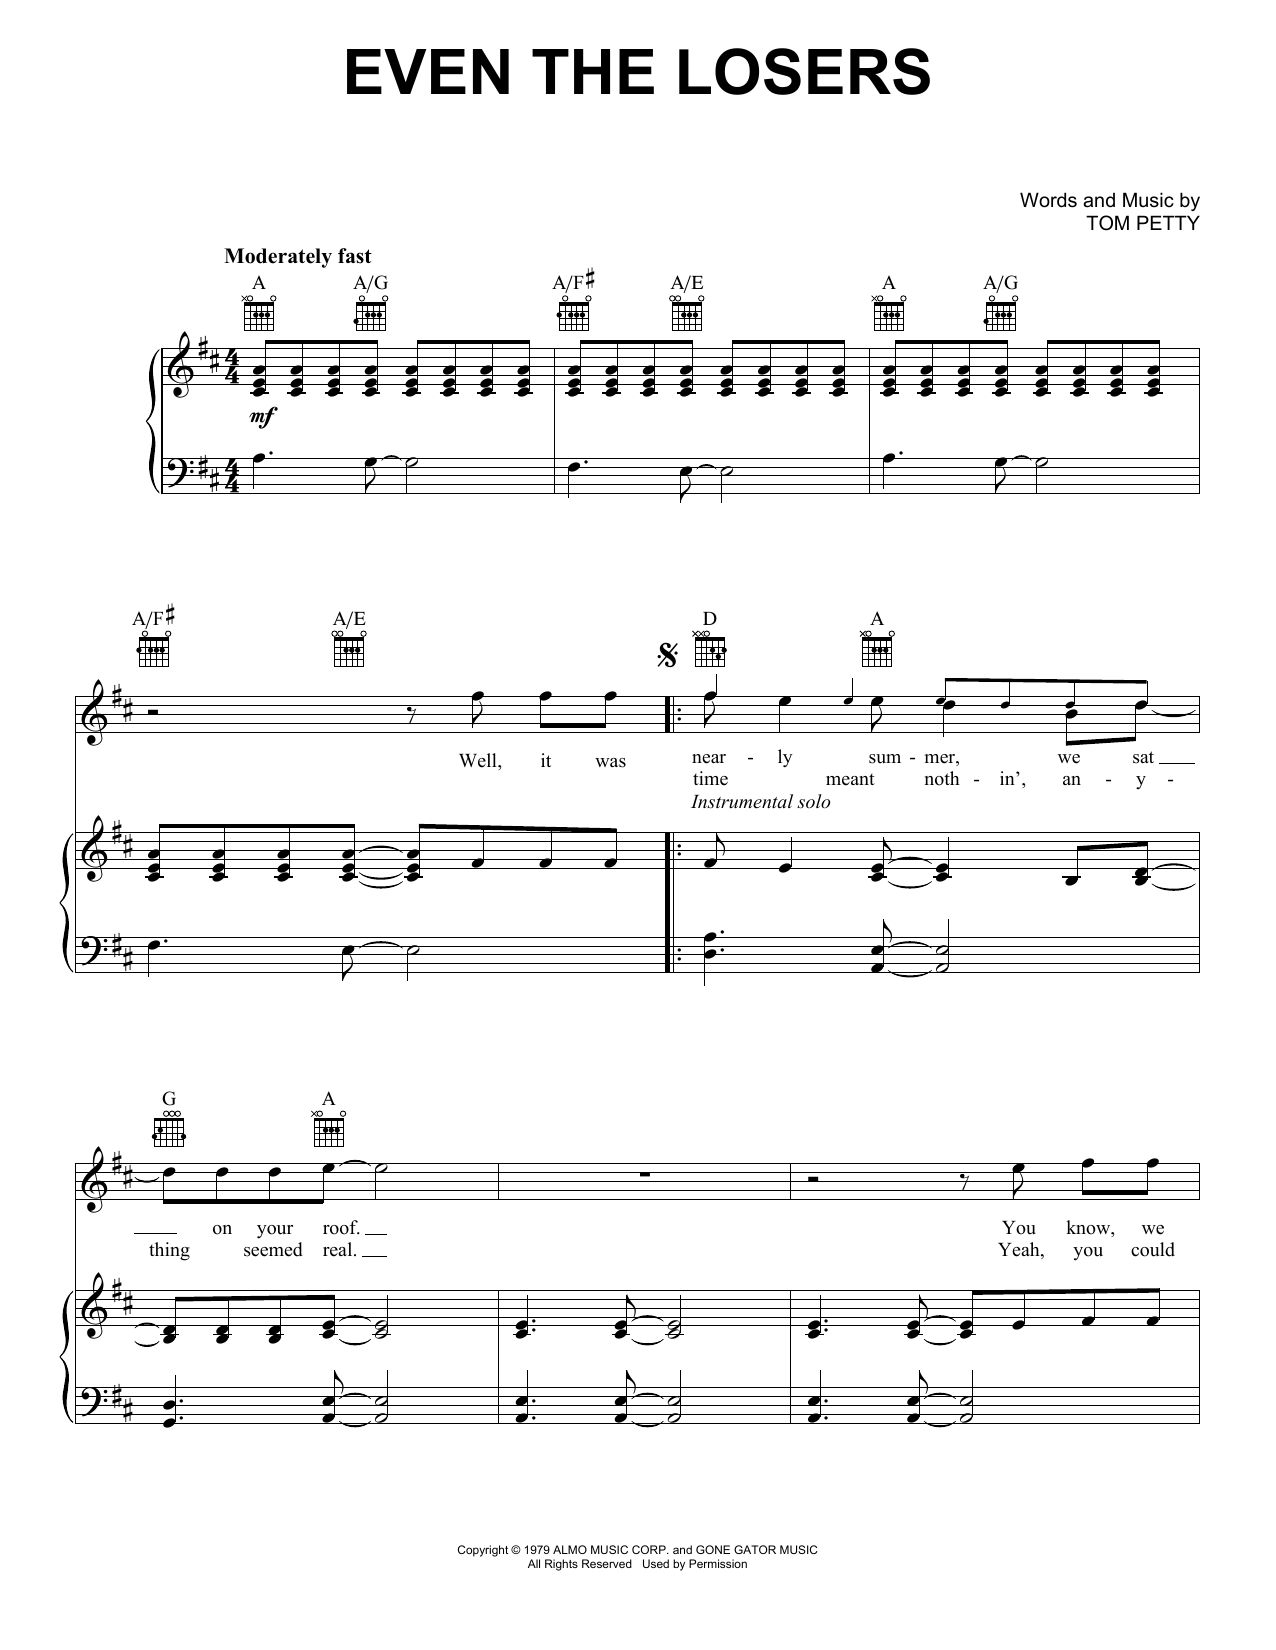 Tom Petty And The Heartbreakers Even The Losers sheet music notes and chords. Download Printable PDF.